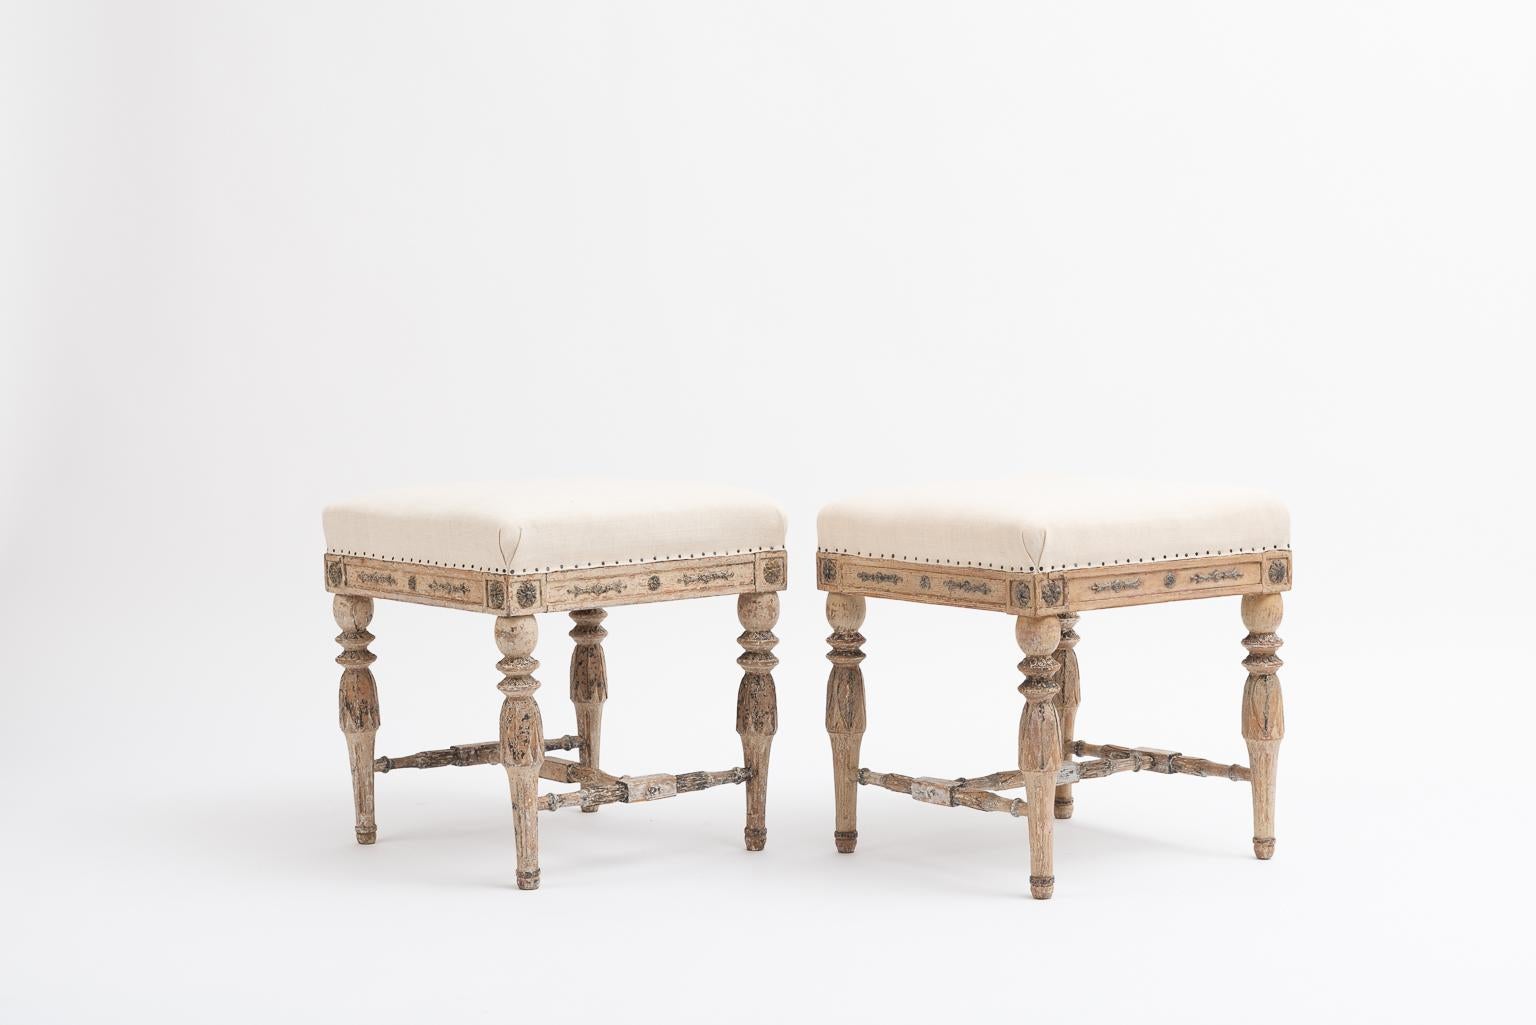 A pair of gustavian stools from the late 1700s, the end of the gustavian period. Dry scraped to original paint. They are well made and of good size making them functional and a charming addition to any room.

The seats are upholstered in handwoven